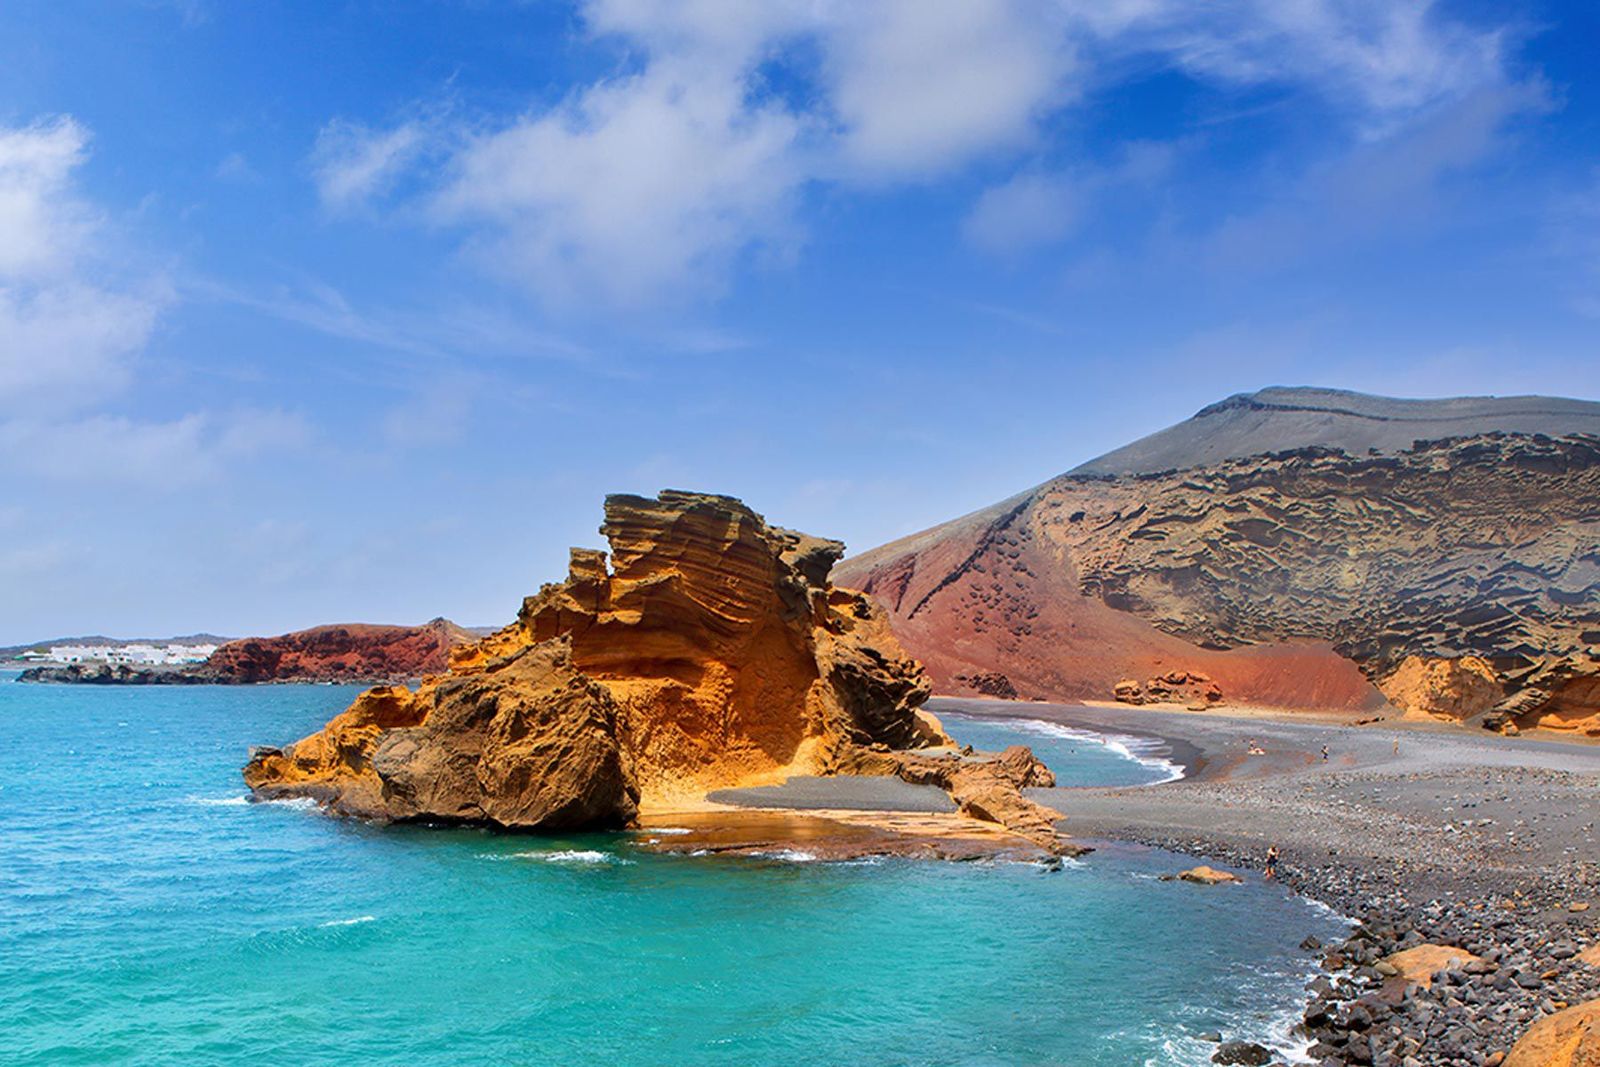 Tenerife-is-the-economic-capital-of-the-Canary-Islands.jpg